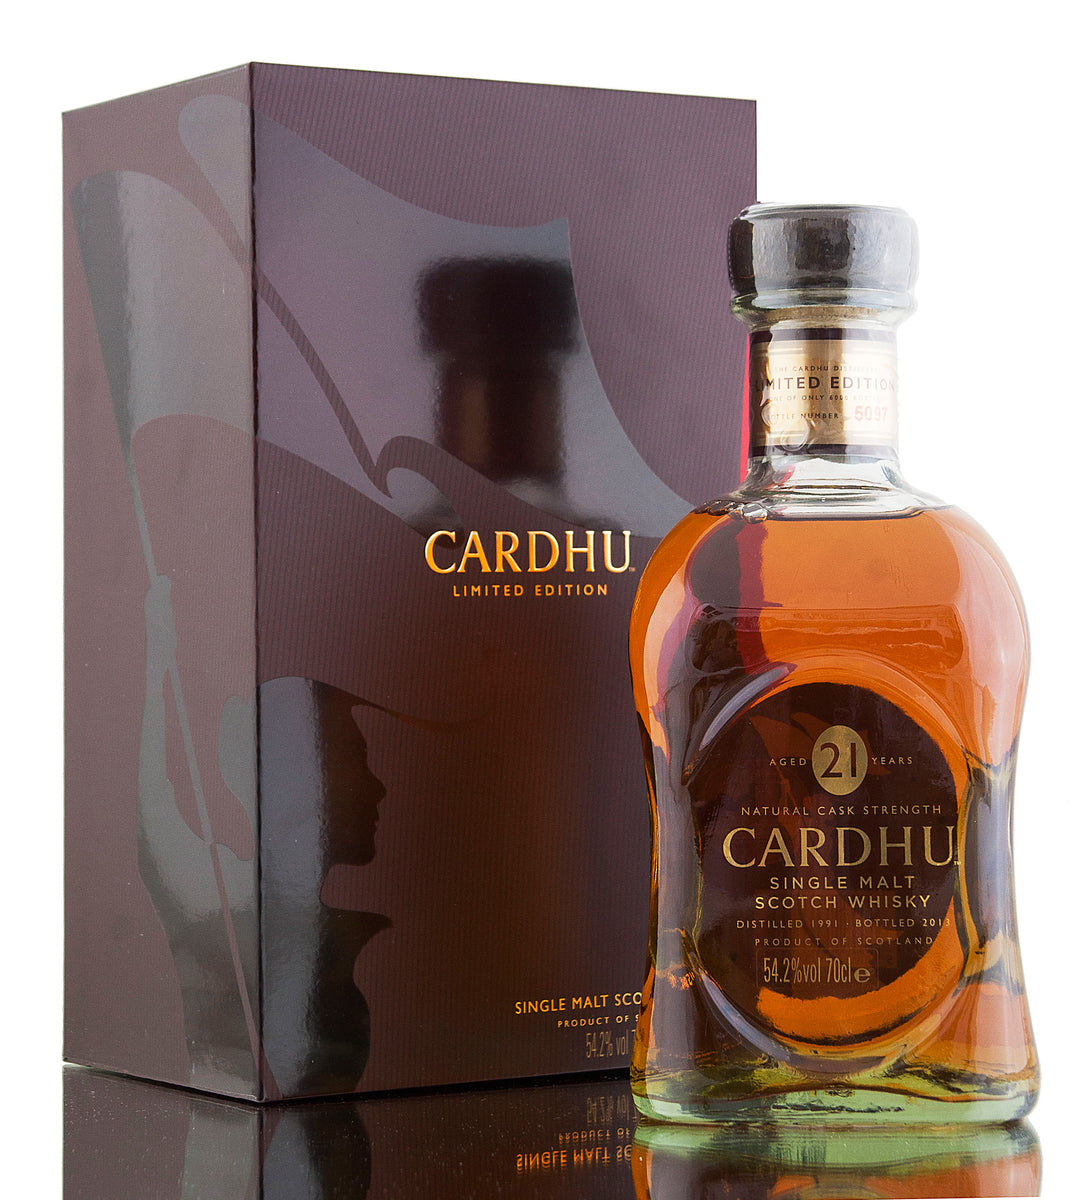 Cardhu 21 Year Old / 2013 Release